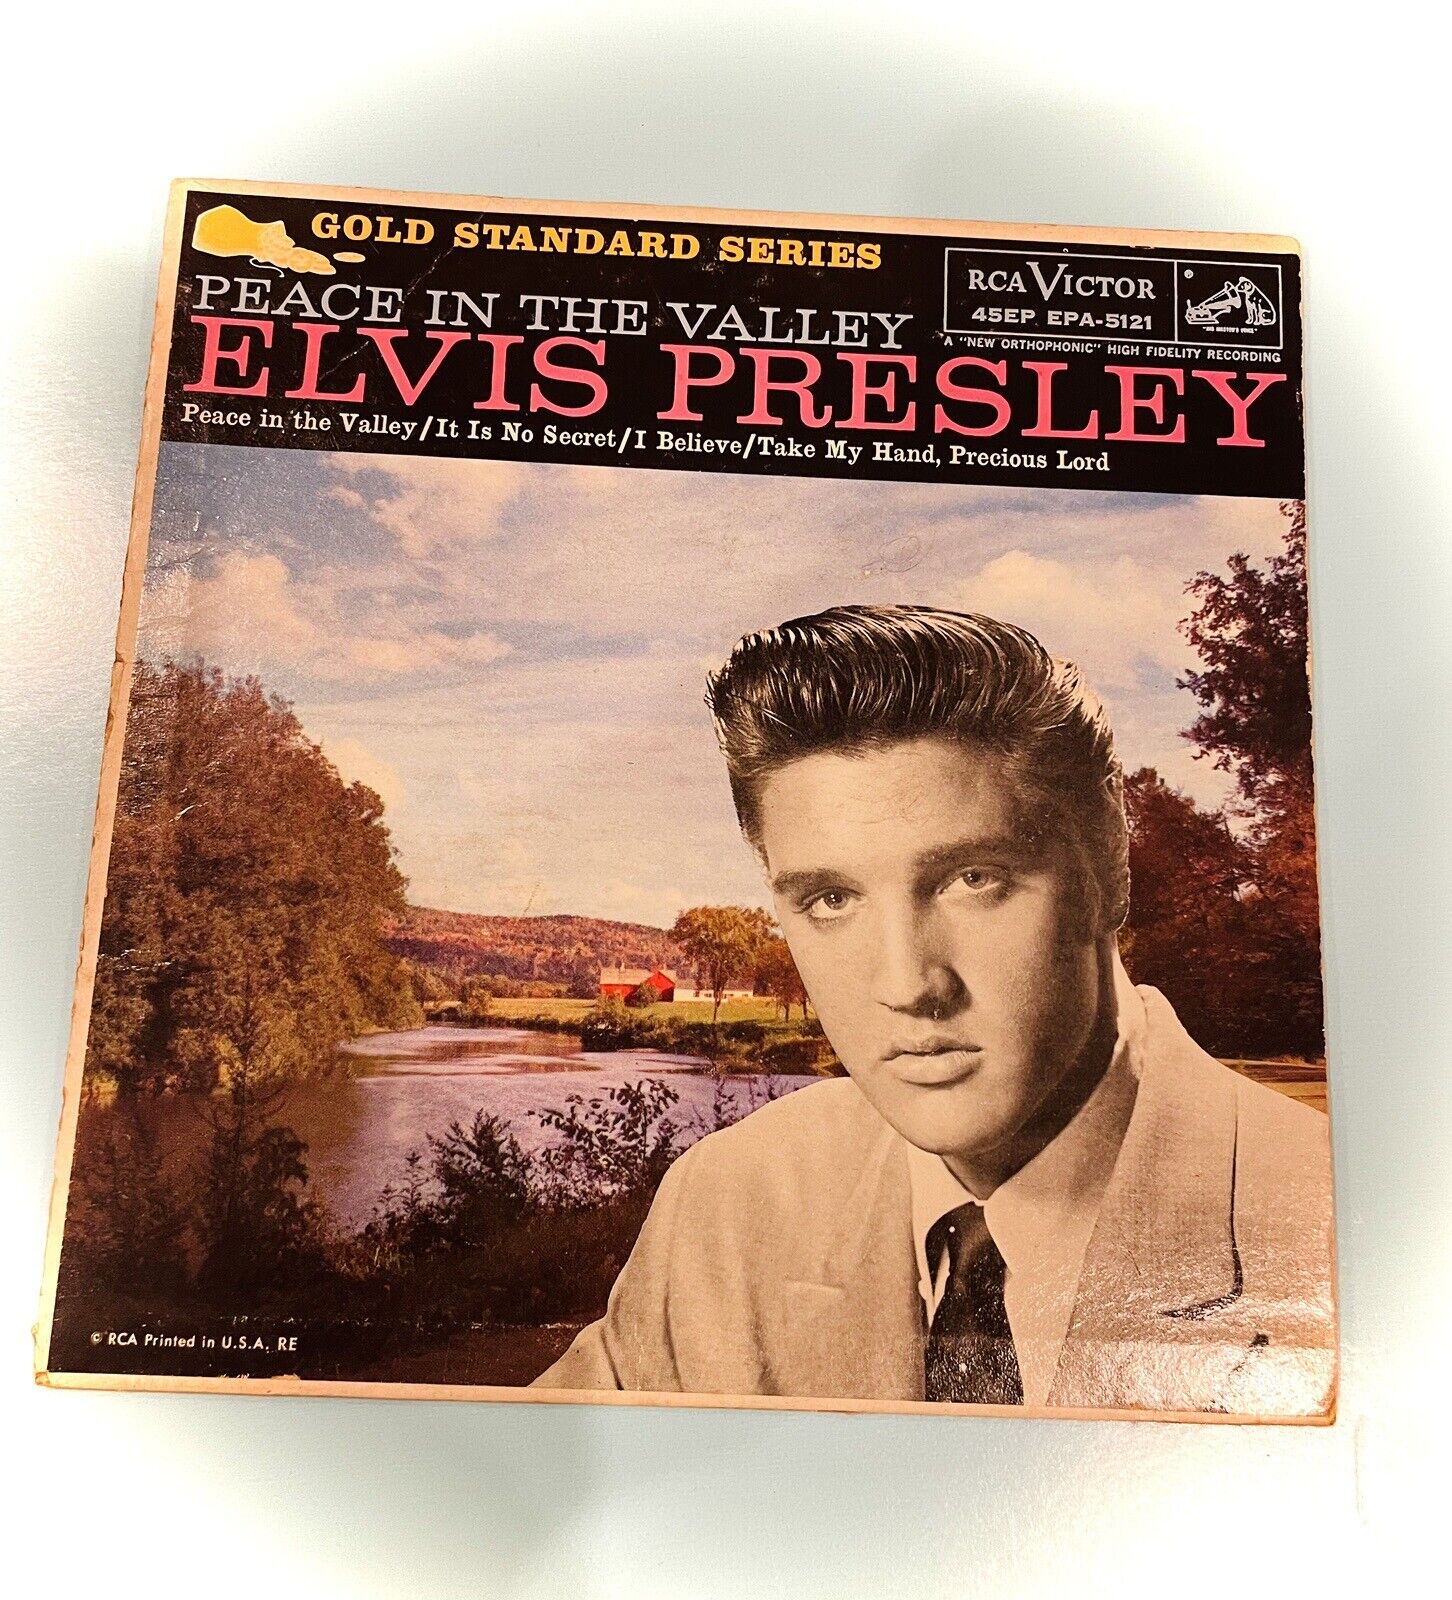 Elvis Presley - Peace in the Valley - 45 EP EPA 5121 Gold Standard